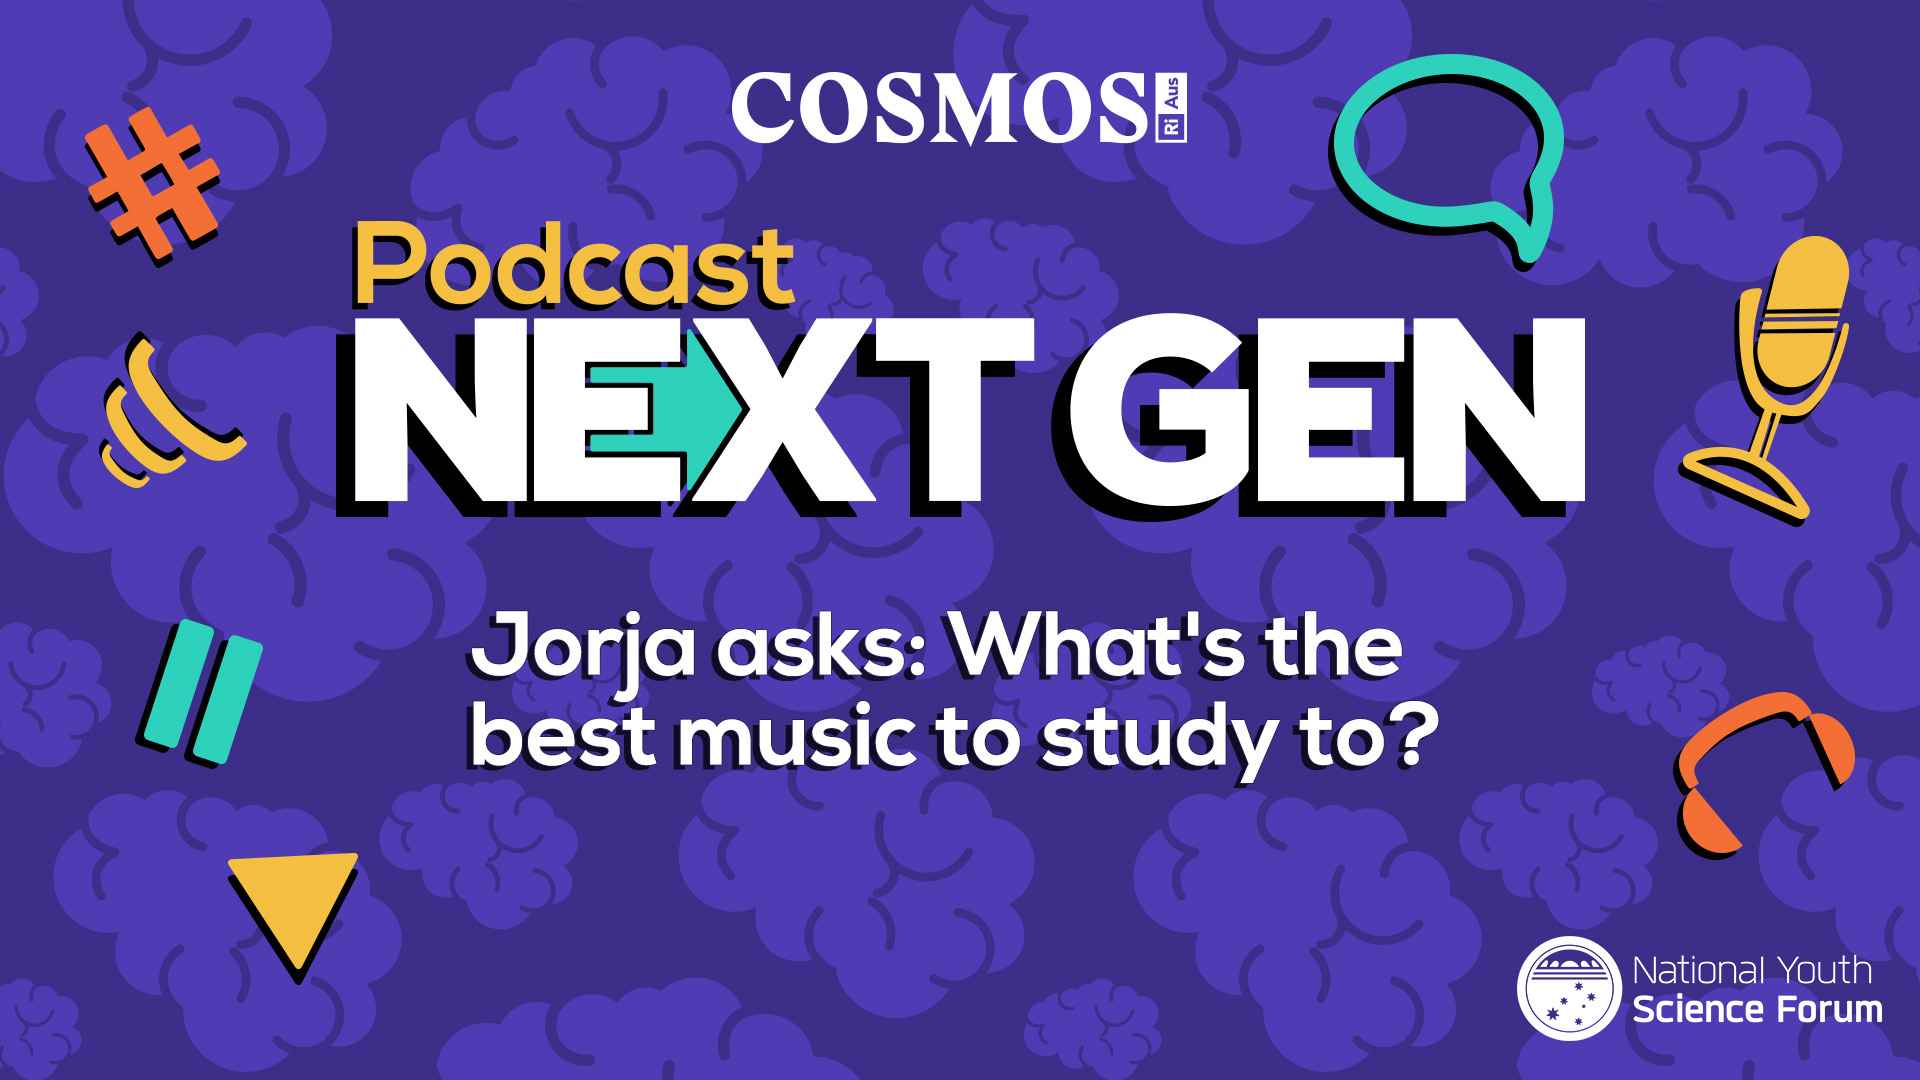 PODCAST NEXT GEN: What’s the best music to study to?